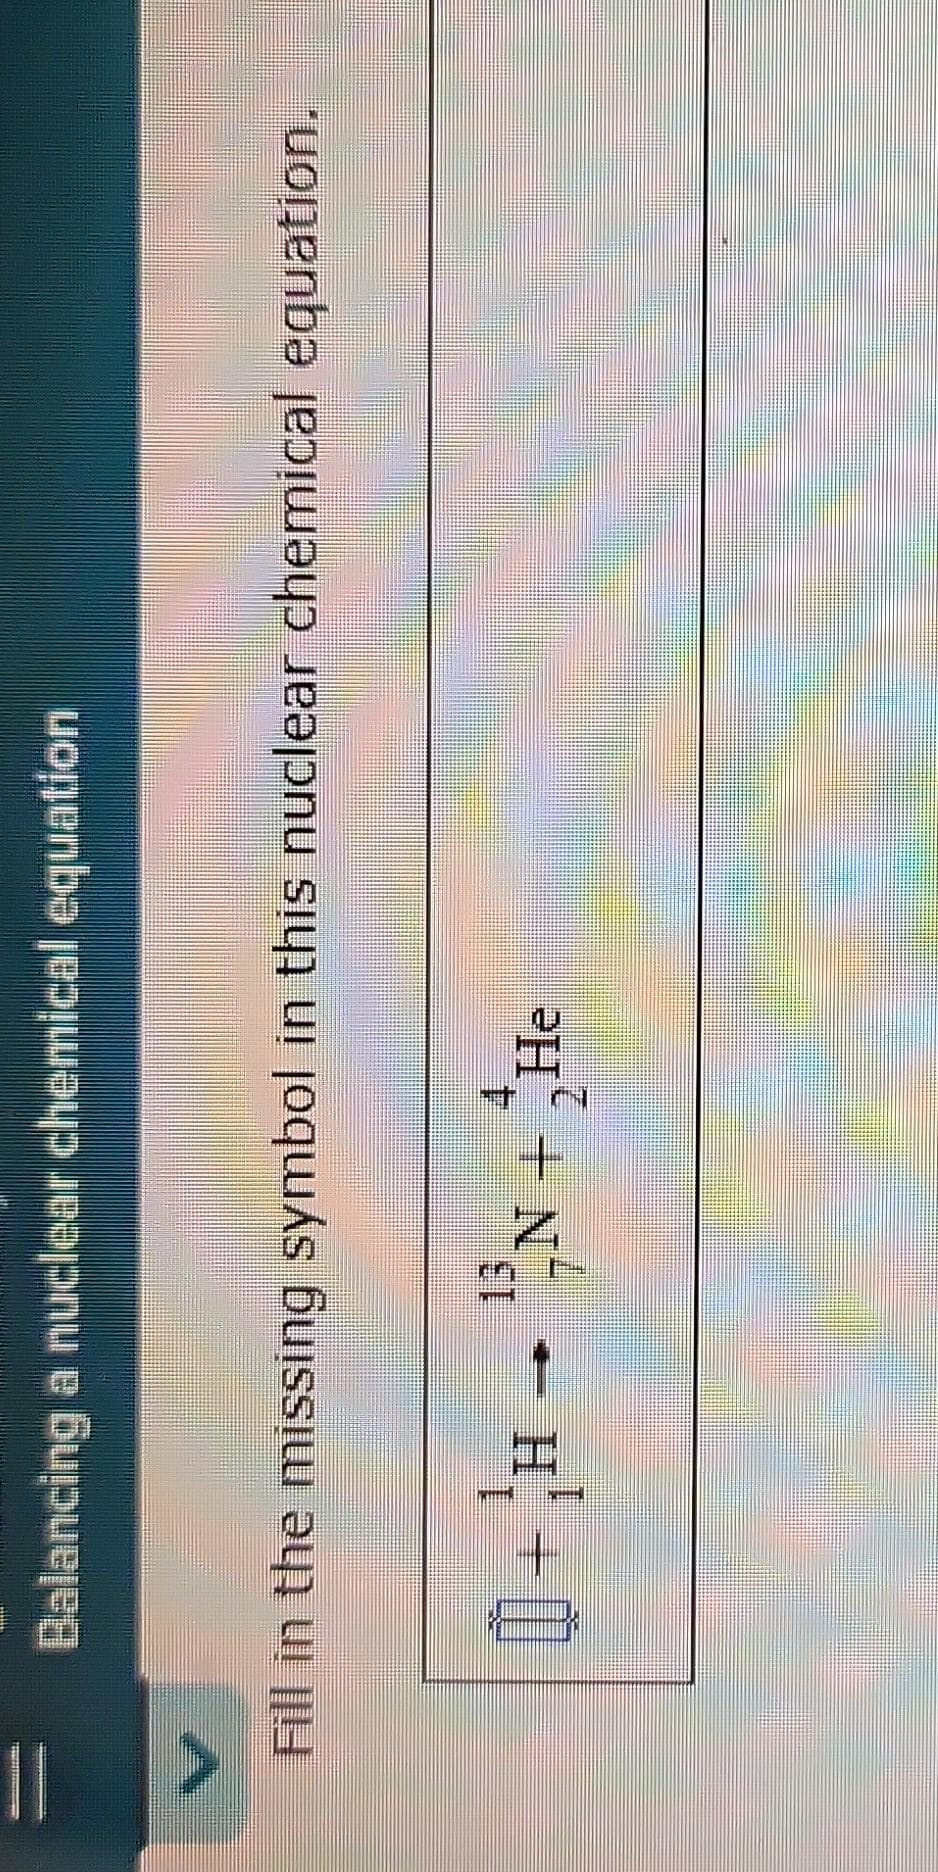 ||
Balancing a nuclear chemical equation
Fill in the missing symbol in this nuclear chemical equation.
0+H-
4.
21
¹N + He